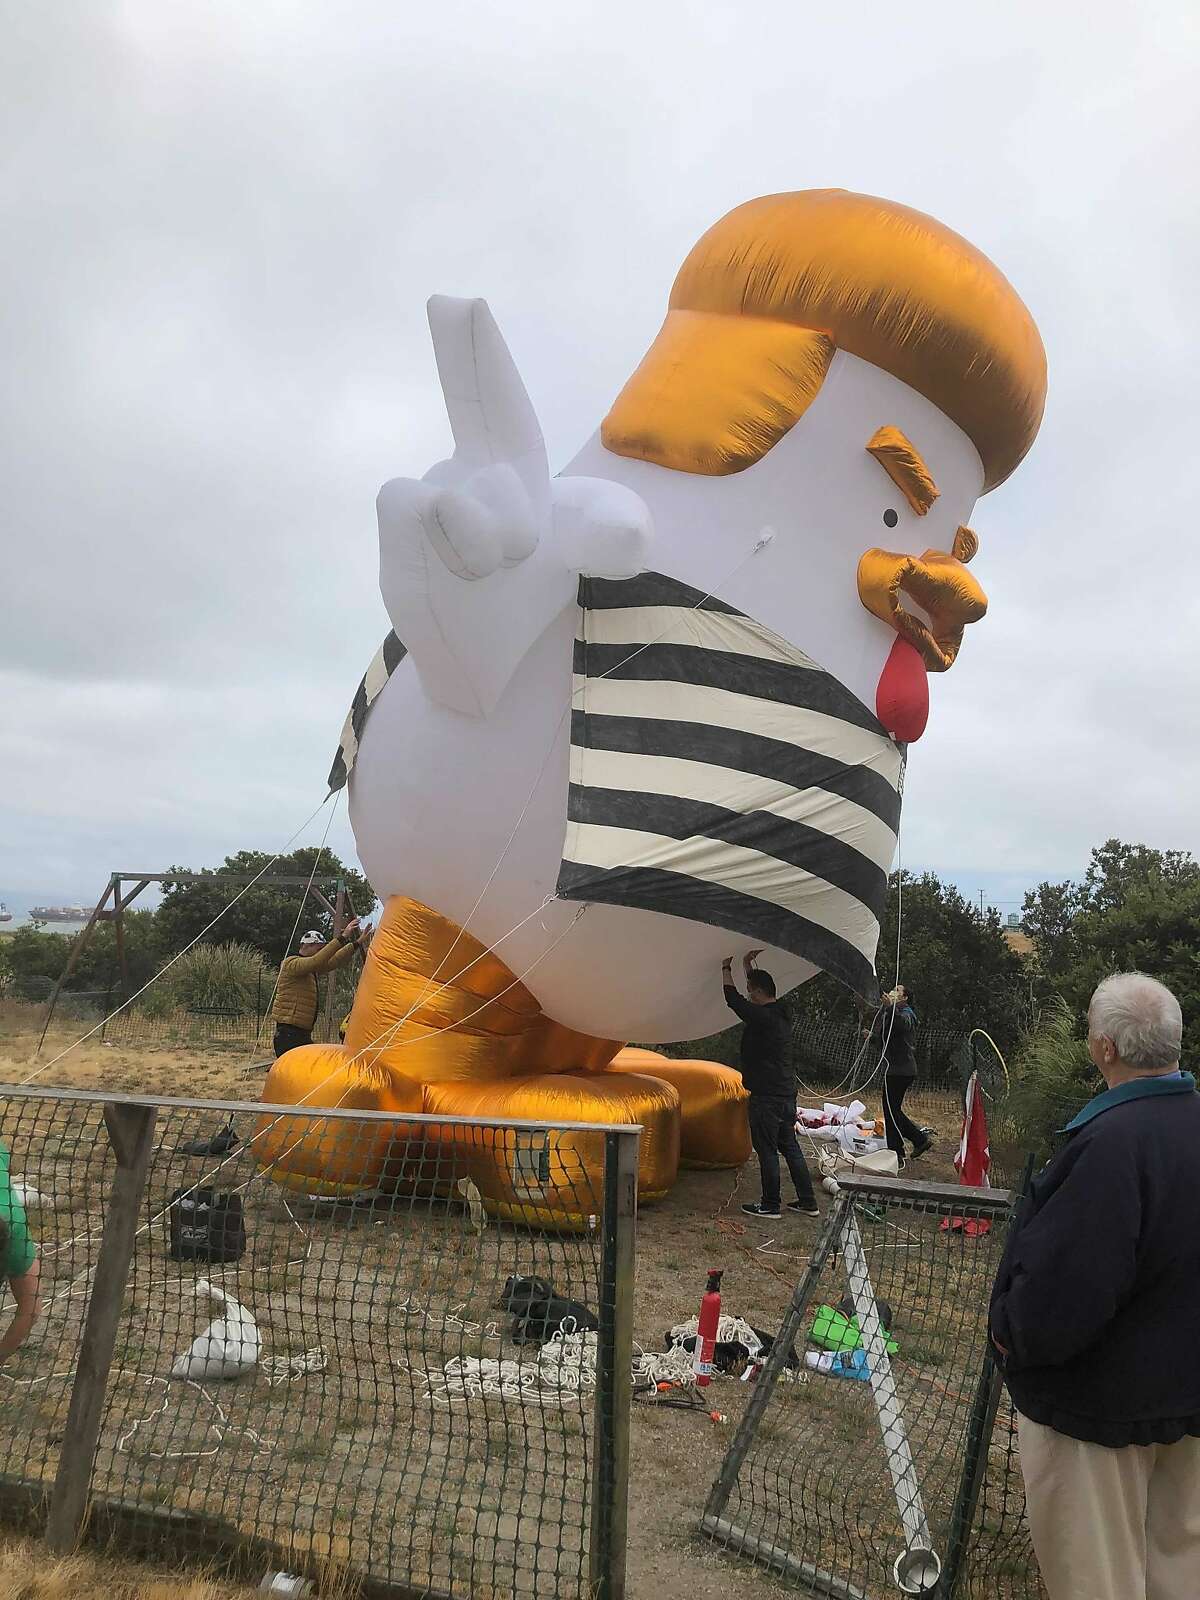 He’s 33 foot high and all puffed up. It’s the Donald Trump chicken balloon, which was retired from active service in San Francisco on Saturday at a mock funeral organized by its owner Danelle Morton.